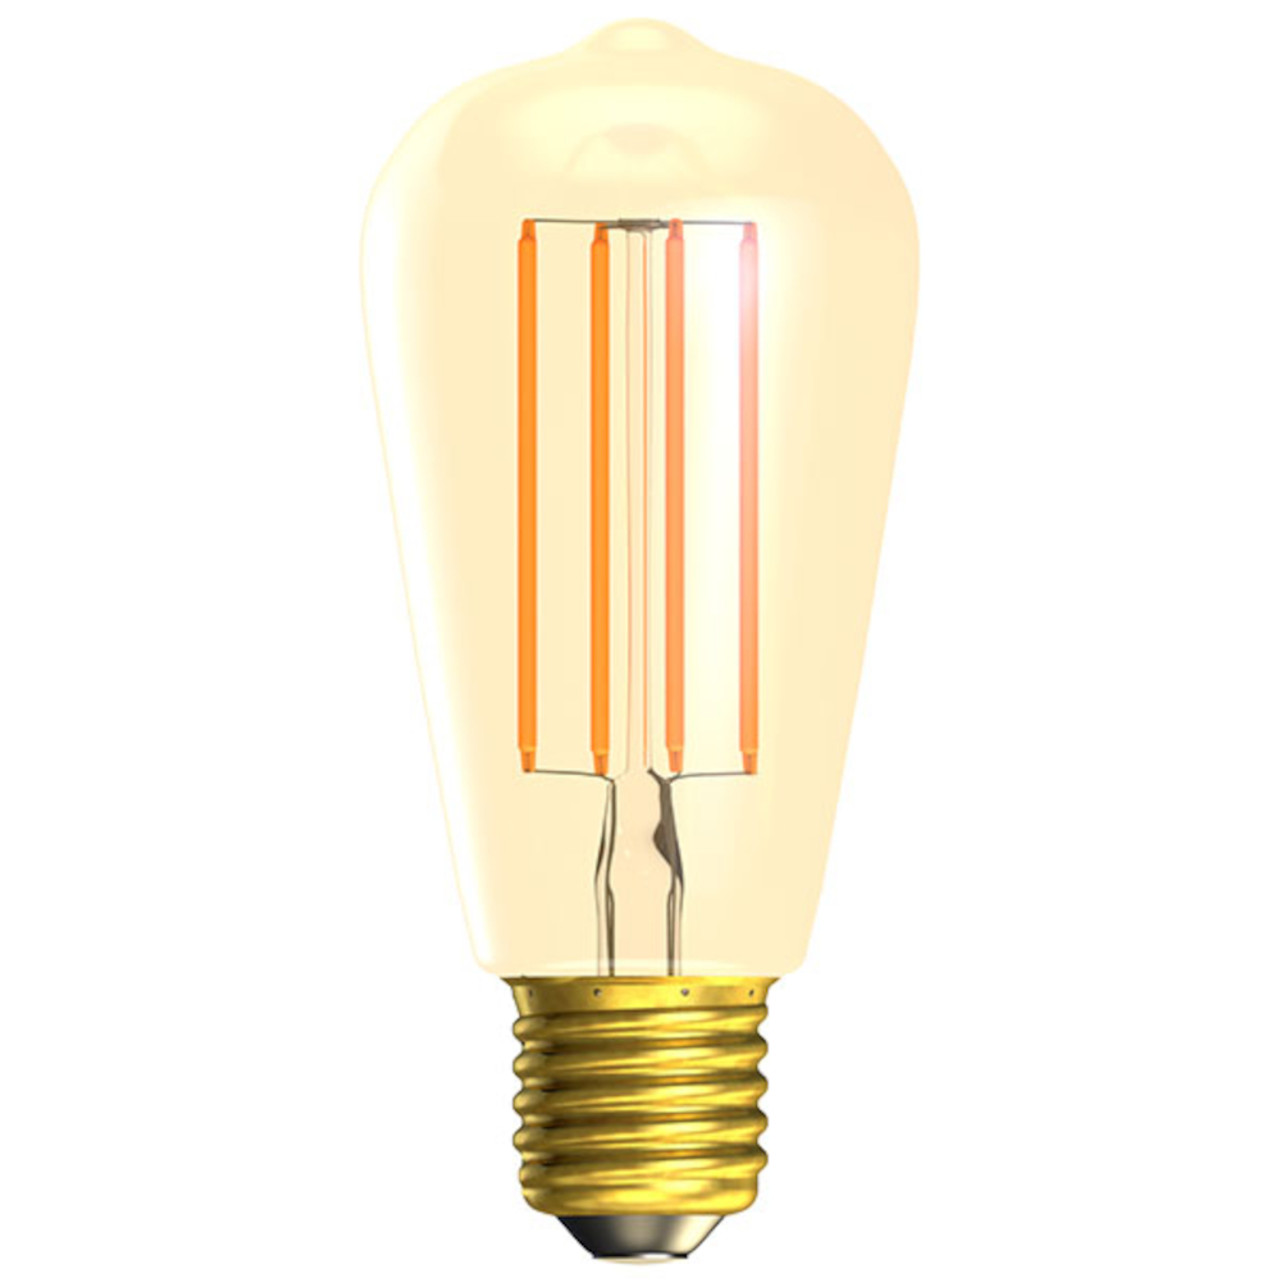 Bell LED Filament Squirrel Cage 240V 6W E27 Amber 2200K RA90 Dimmable